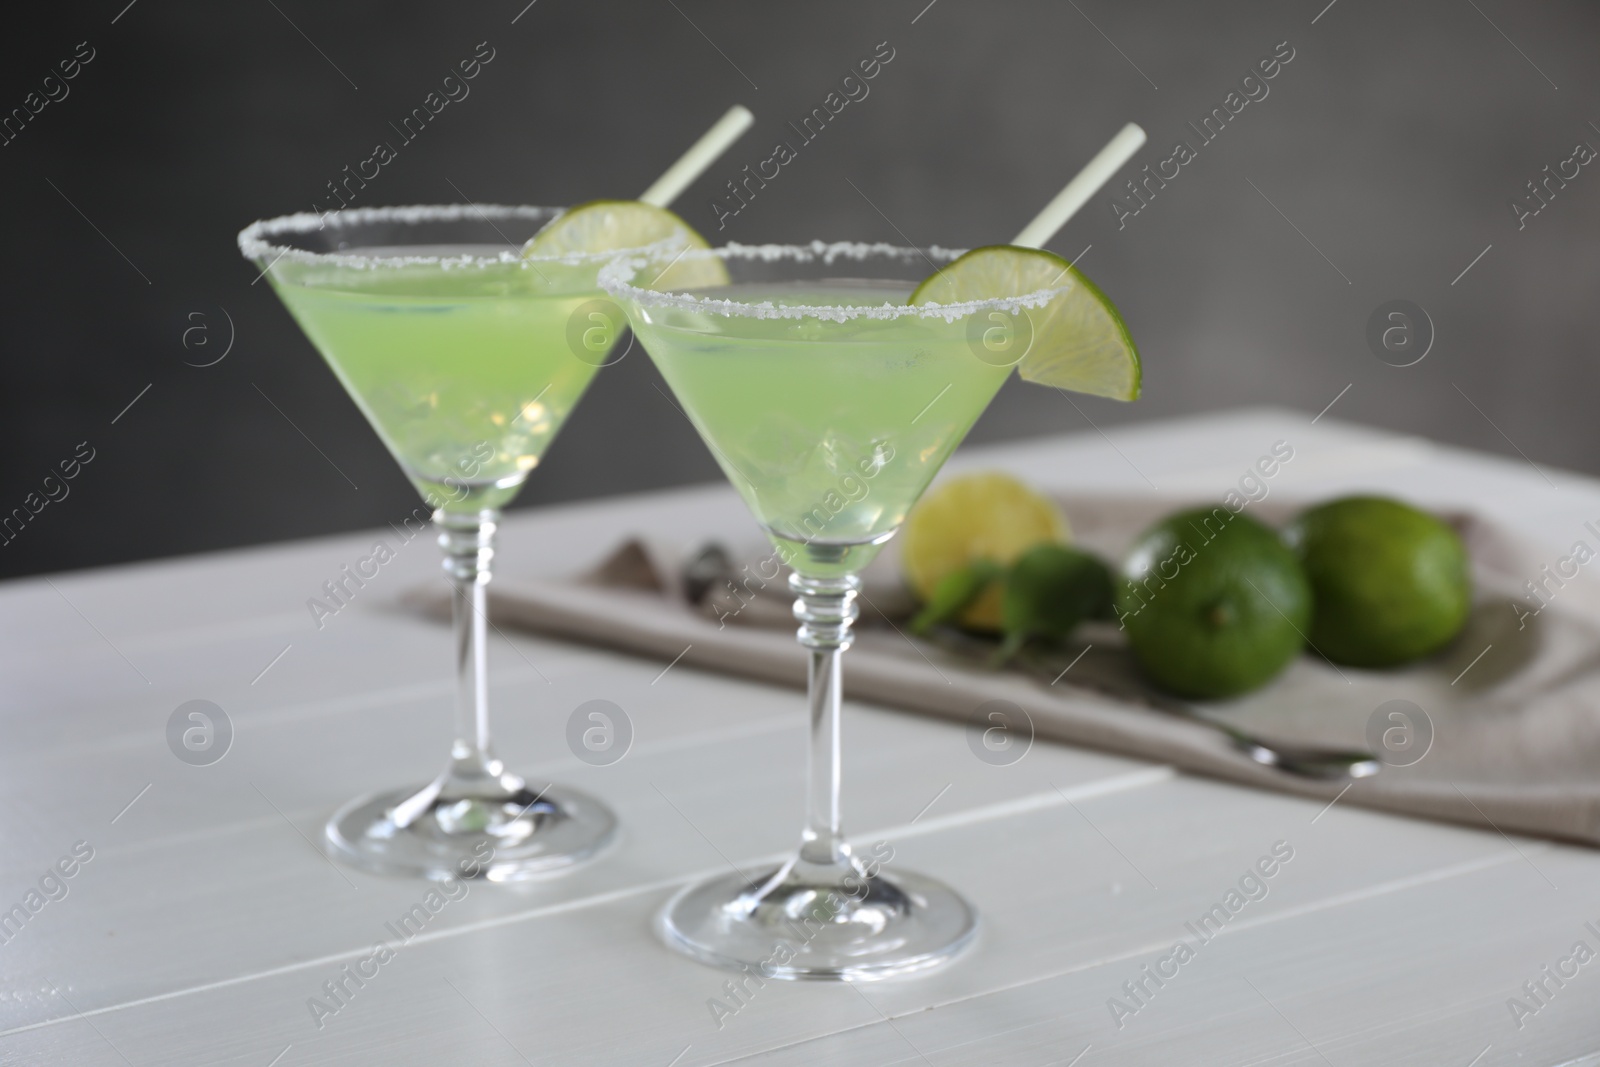 Photo of Delicious Margarita cocktail in glasses, lime and bar spoon on white wooden table